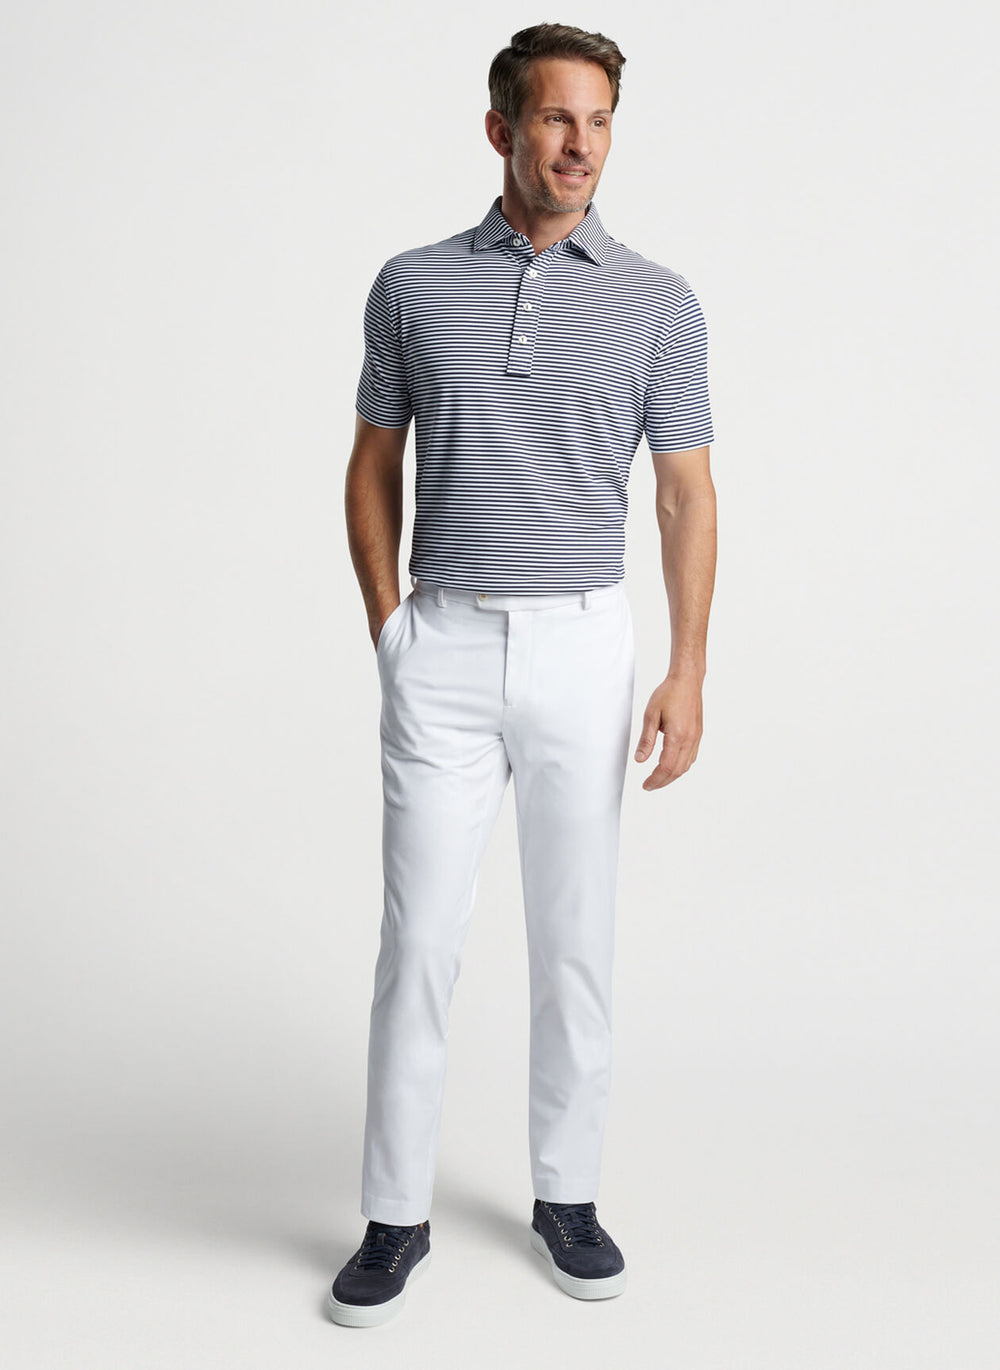 Peter Millar Mood Performance Mesh Polo In Navy